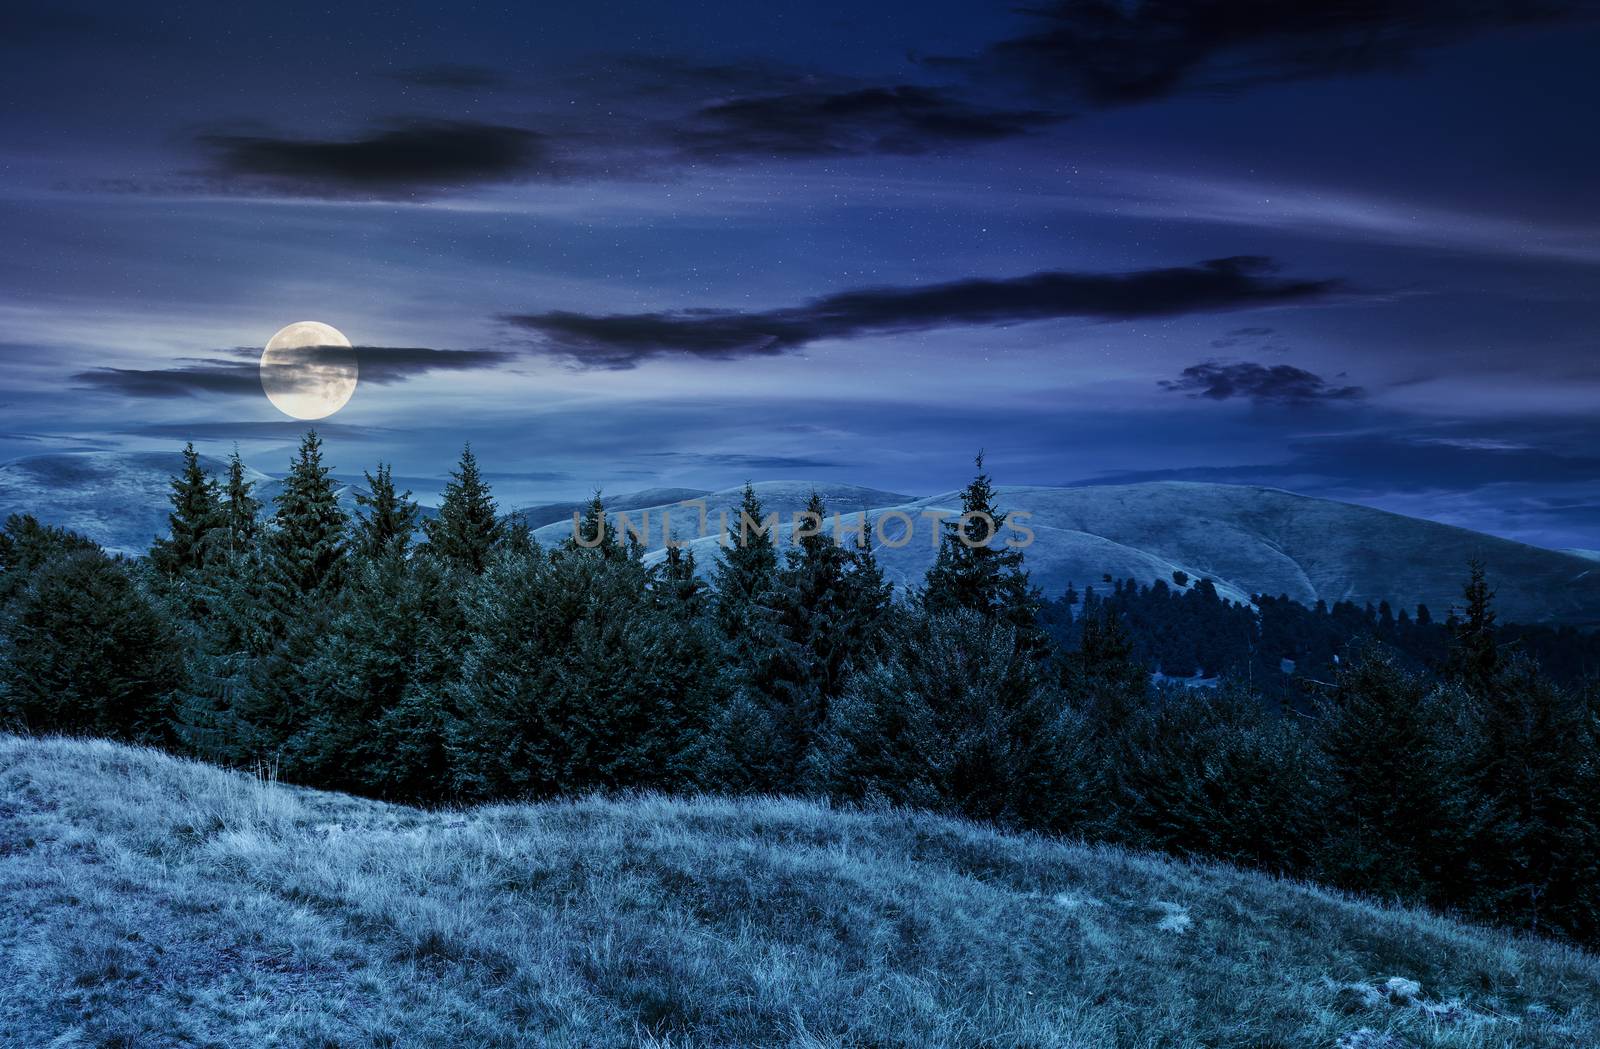 summer landscape with forested hills at night in full moon light. beautiful scenery of Svydovets mountain ridge, Ukraine